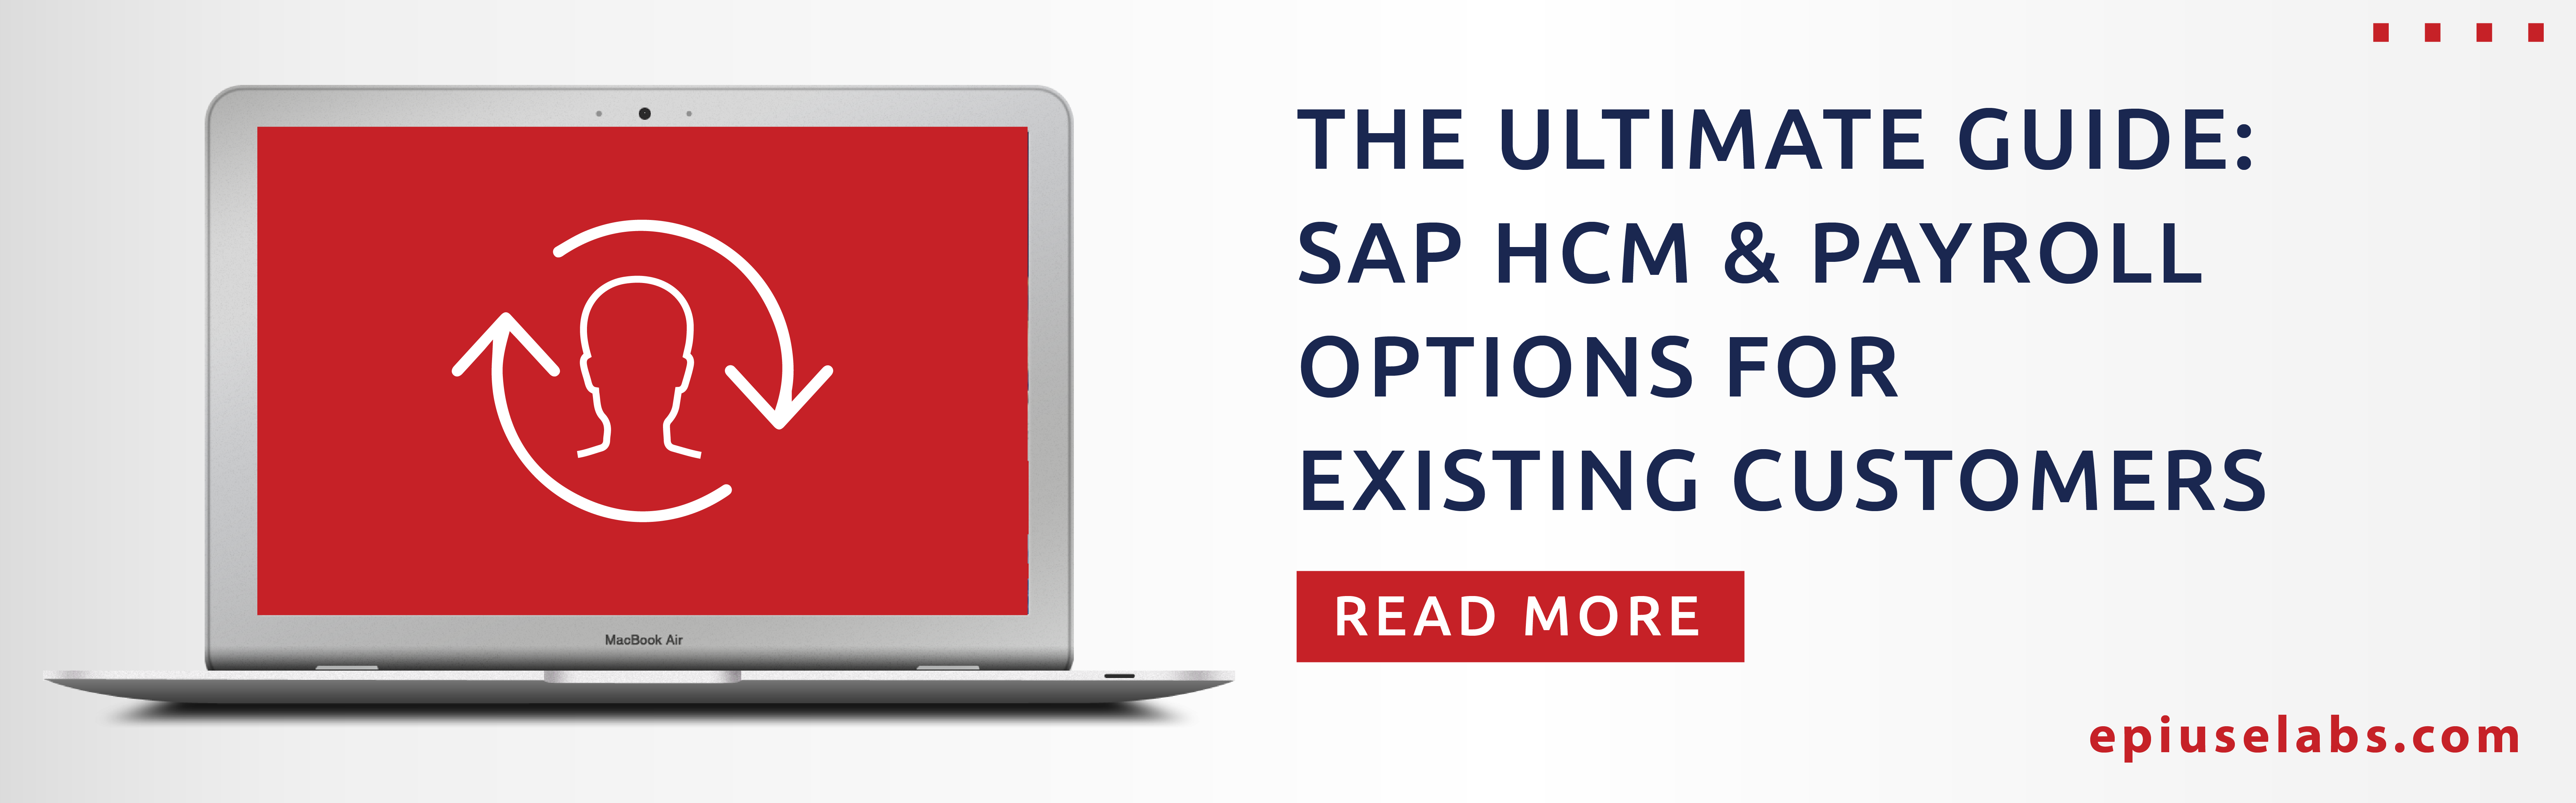 THE ULTIMATE GUIDE: SAP HCM & PAYROLL OPTIONS FOR EXISTING CUSTOMERS